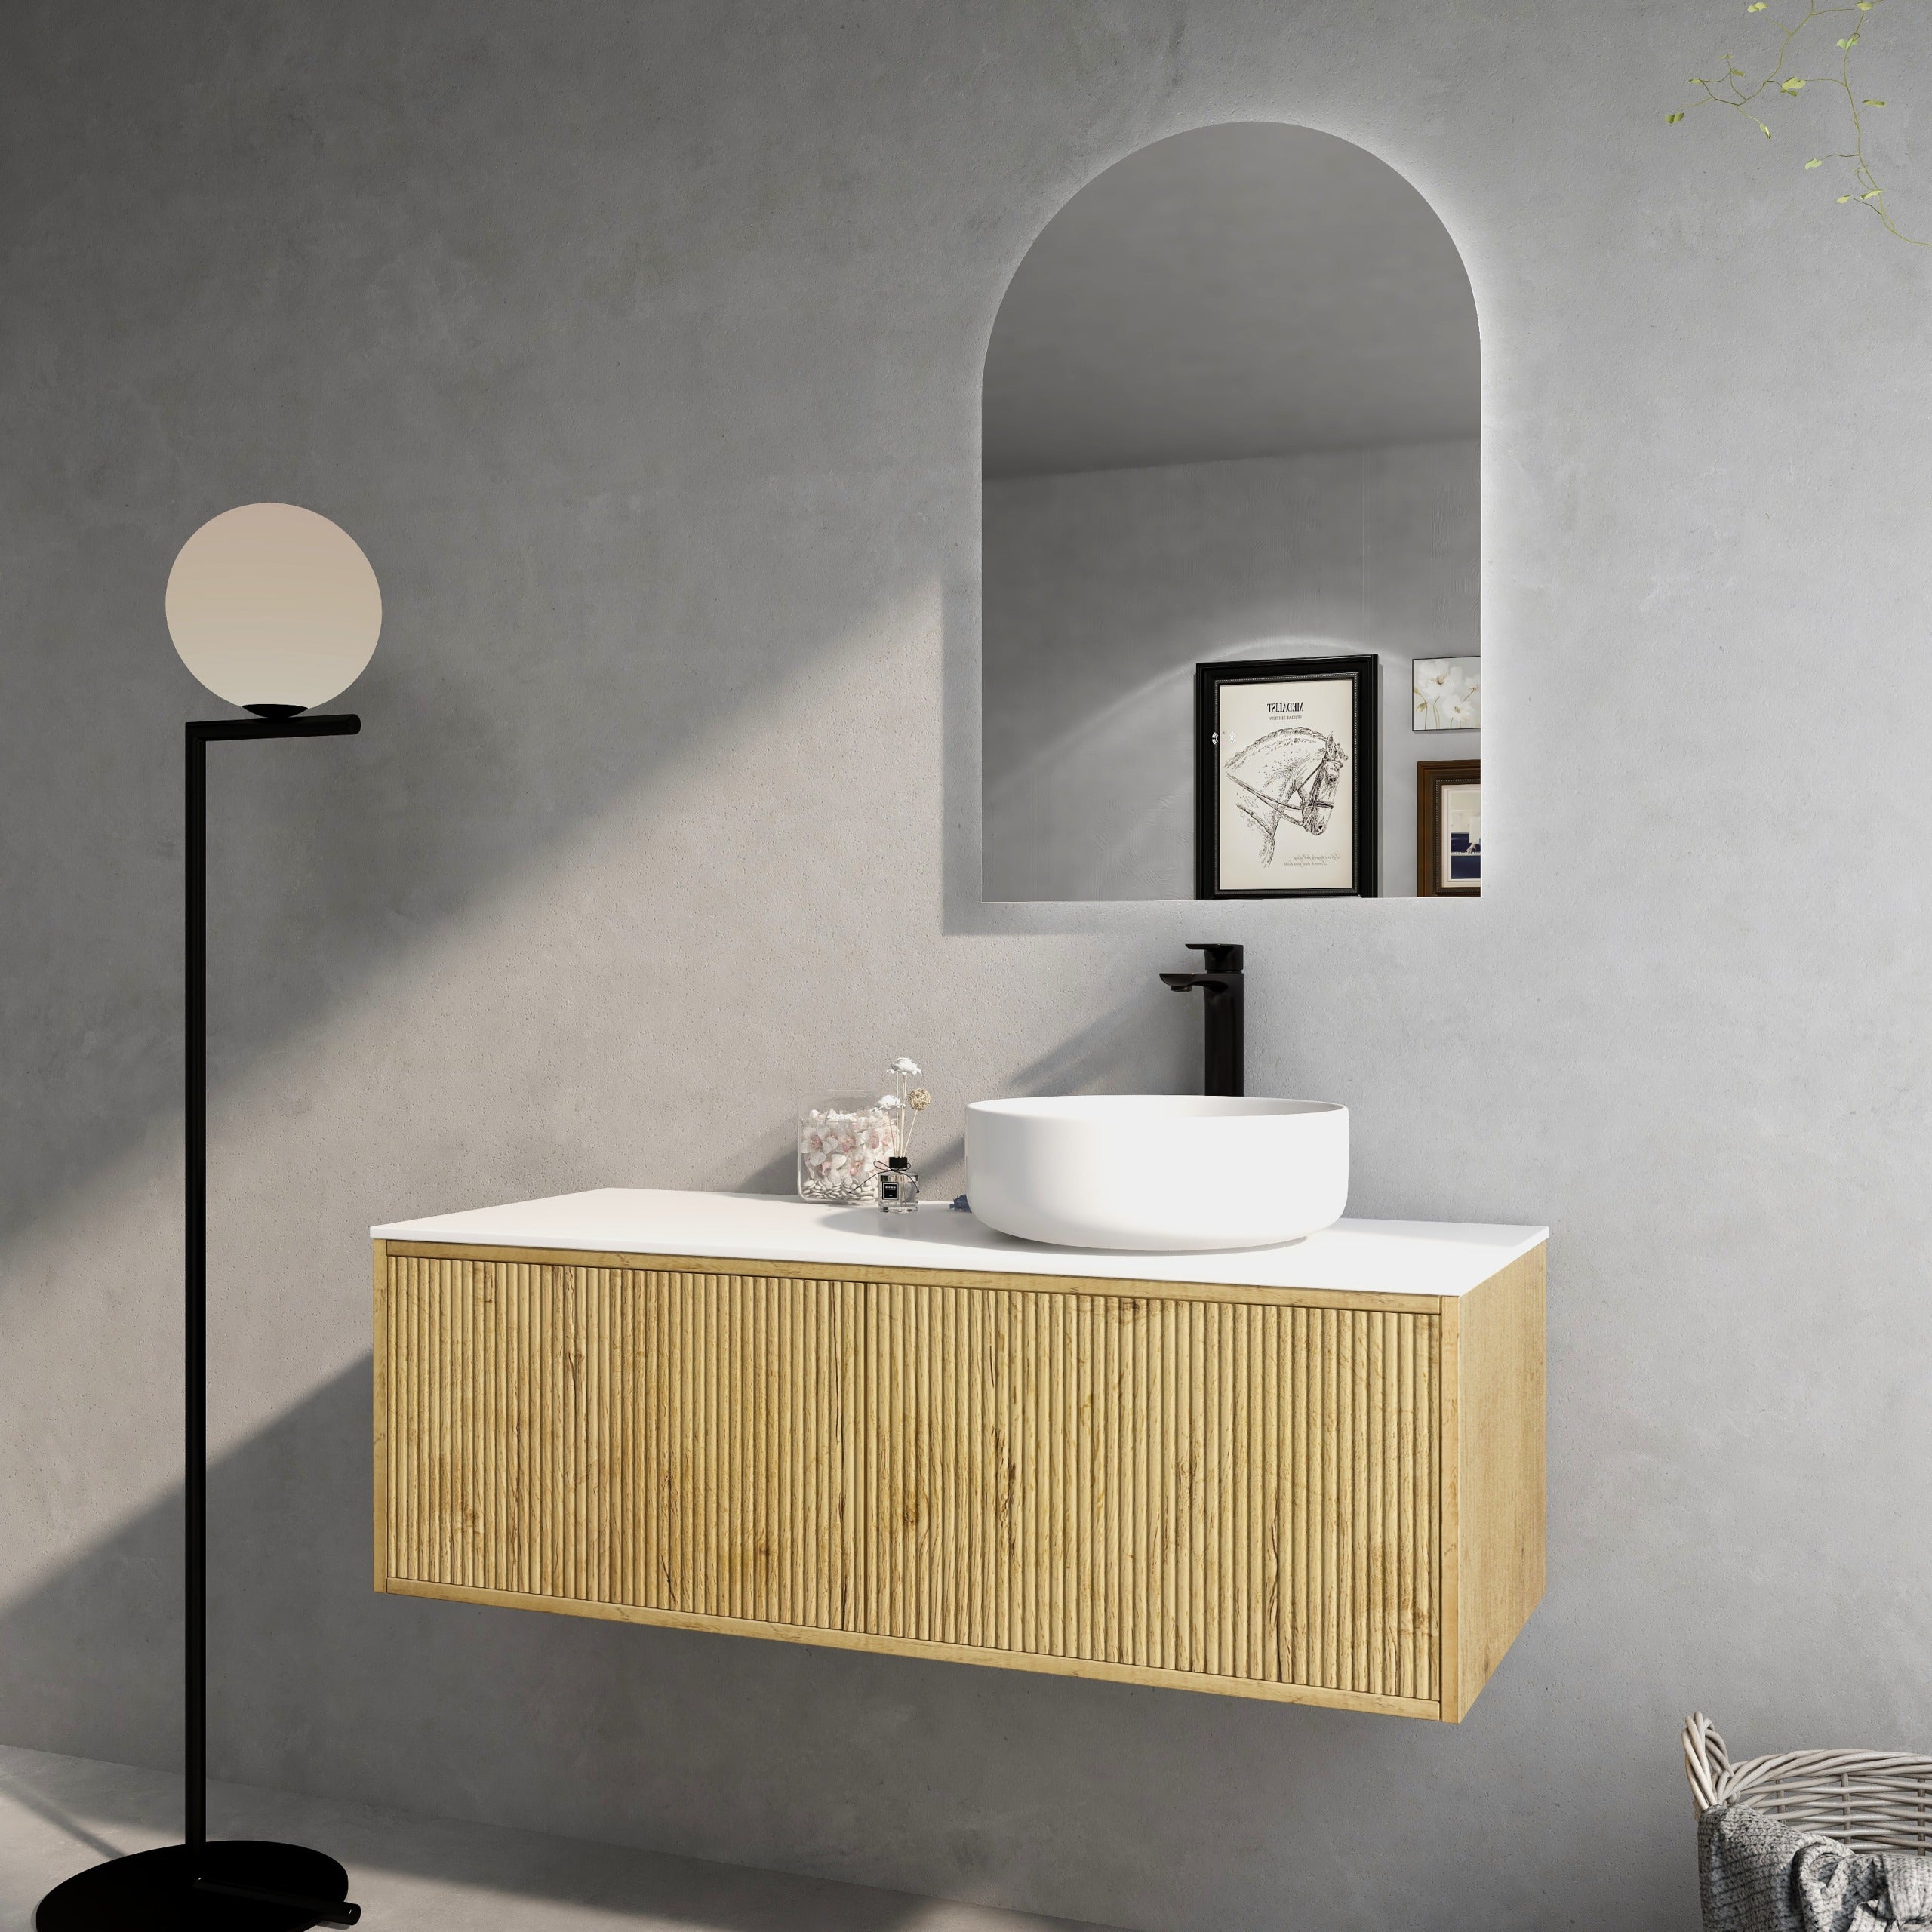 CETO BELLEVUE PRIME OAK 1200MM SPACE SAVING SINGLE BOWL WALL HUNG VANITY AVAILABLE IN LEFT HAND DRAWER AND RIGHT HAND DRAWER